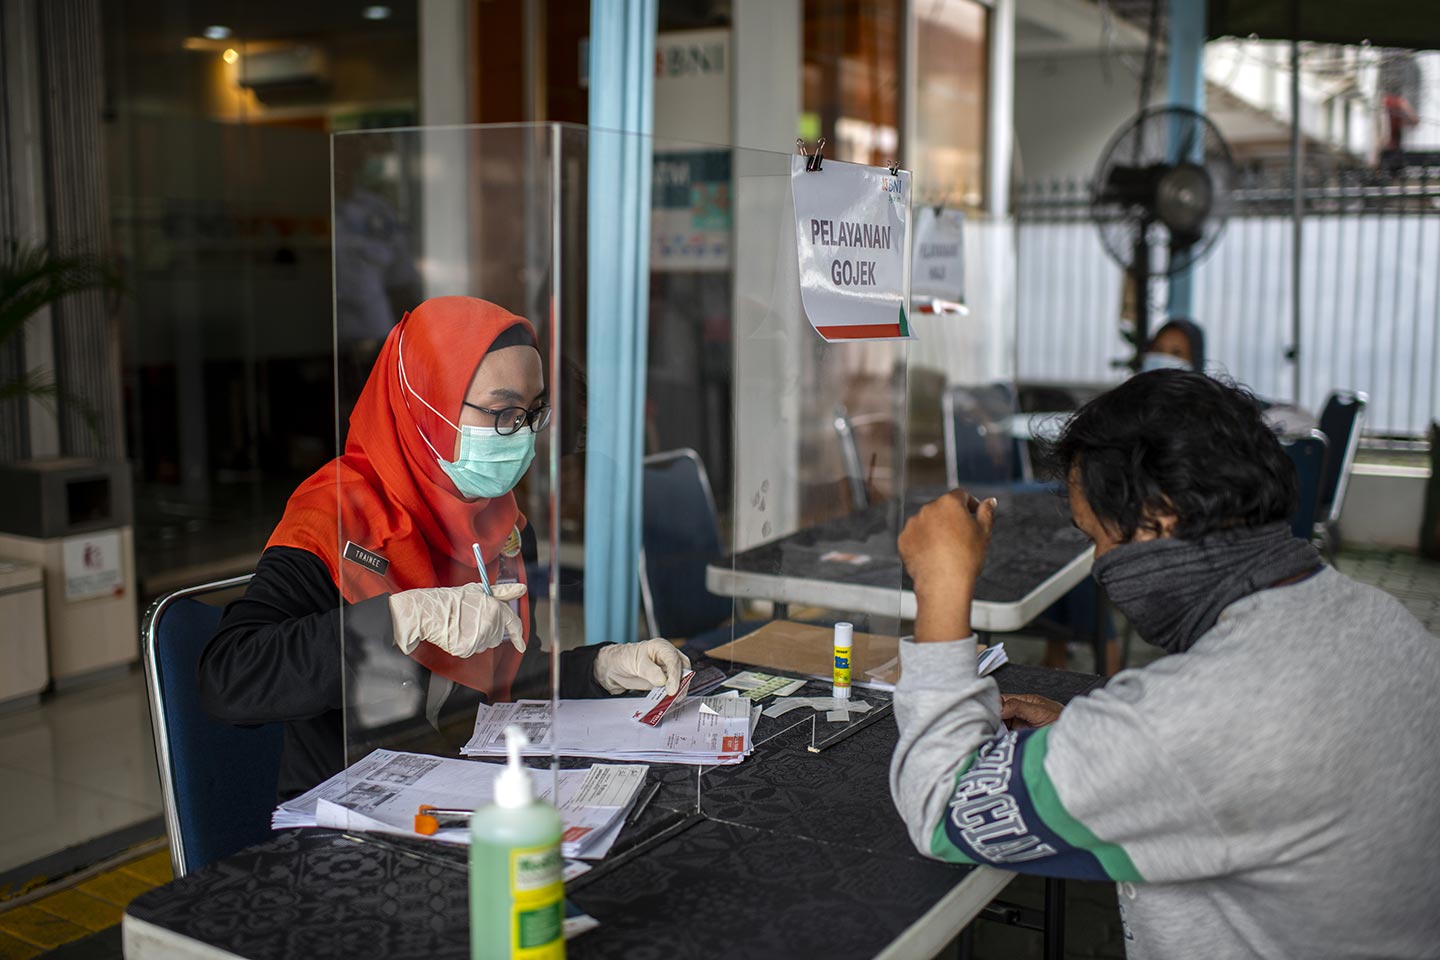 Bank officer (left) serving to customer in front of the bank using protective glass during Covid-19 outbreak in South Jakarta, Indonesia on 31 March, 2020. Almost all bank in Jakarta implement a social distancing for customer services. Credit: UNICEF/2020/Arimacs Wilander